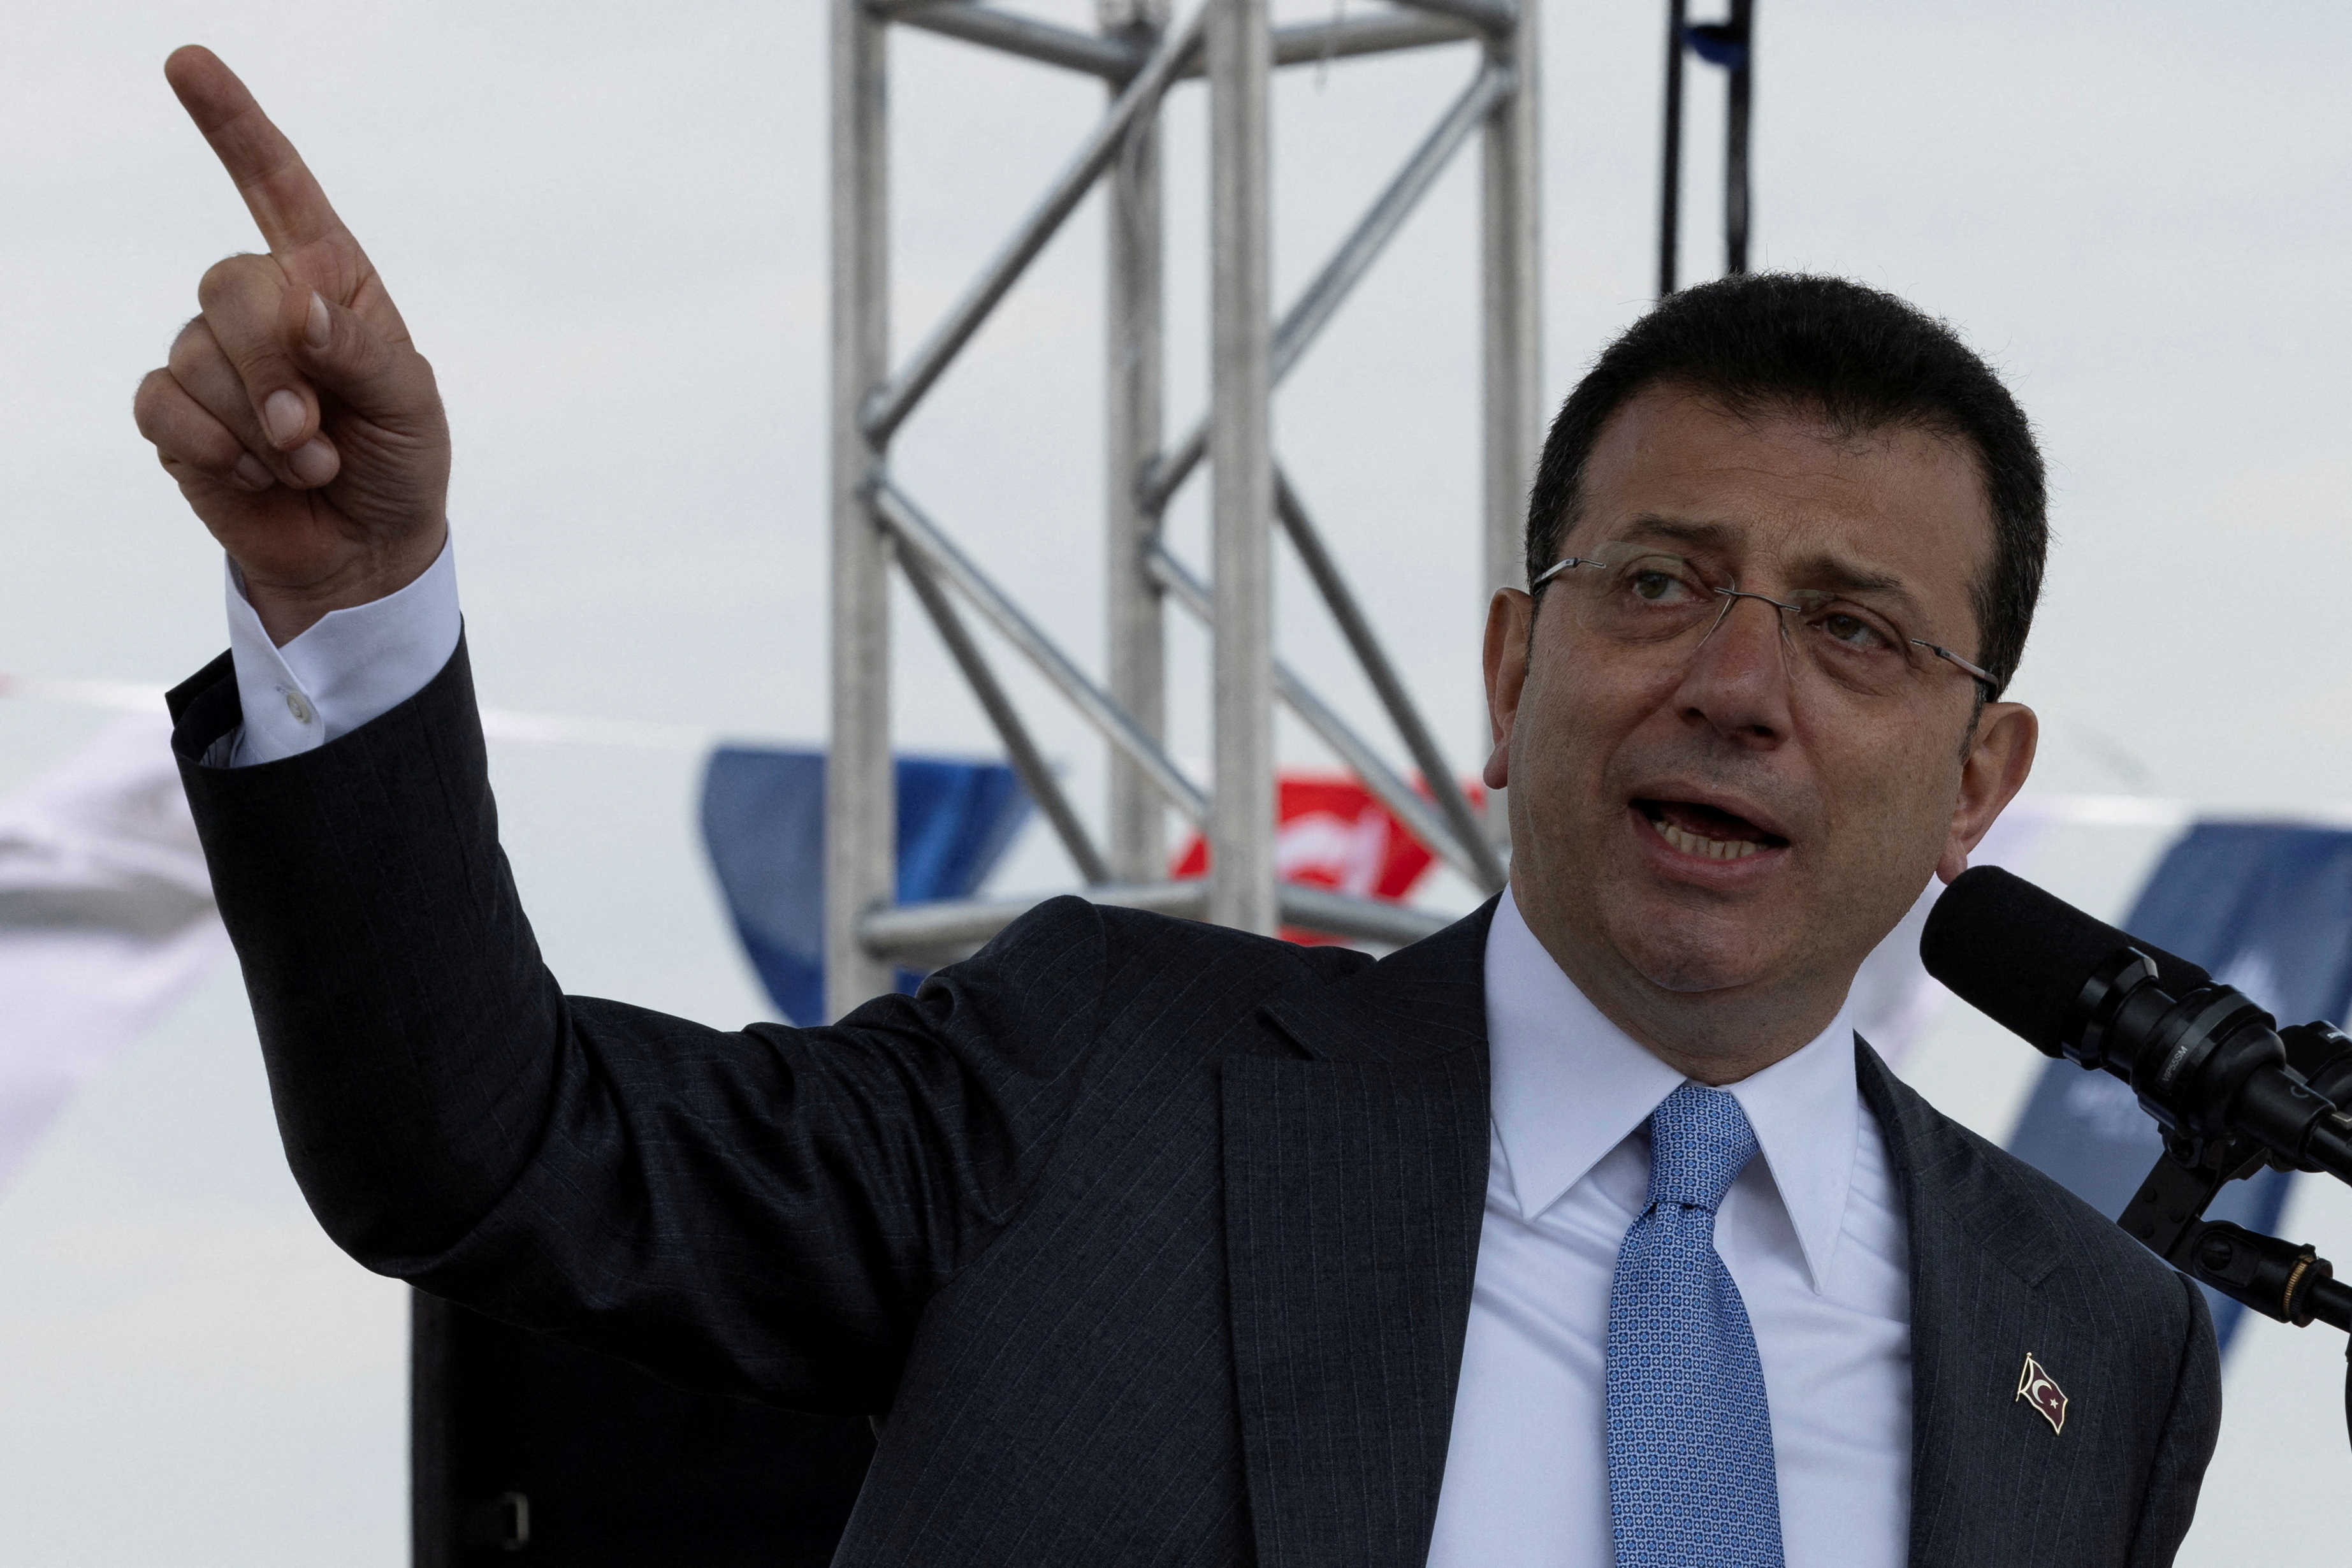 Istanbul's mayor Ekrem Imamoglu attends a campaign event in Istanbul